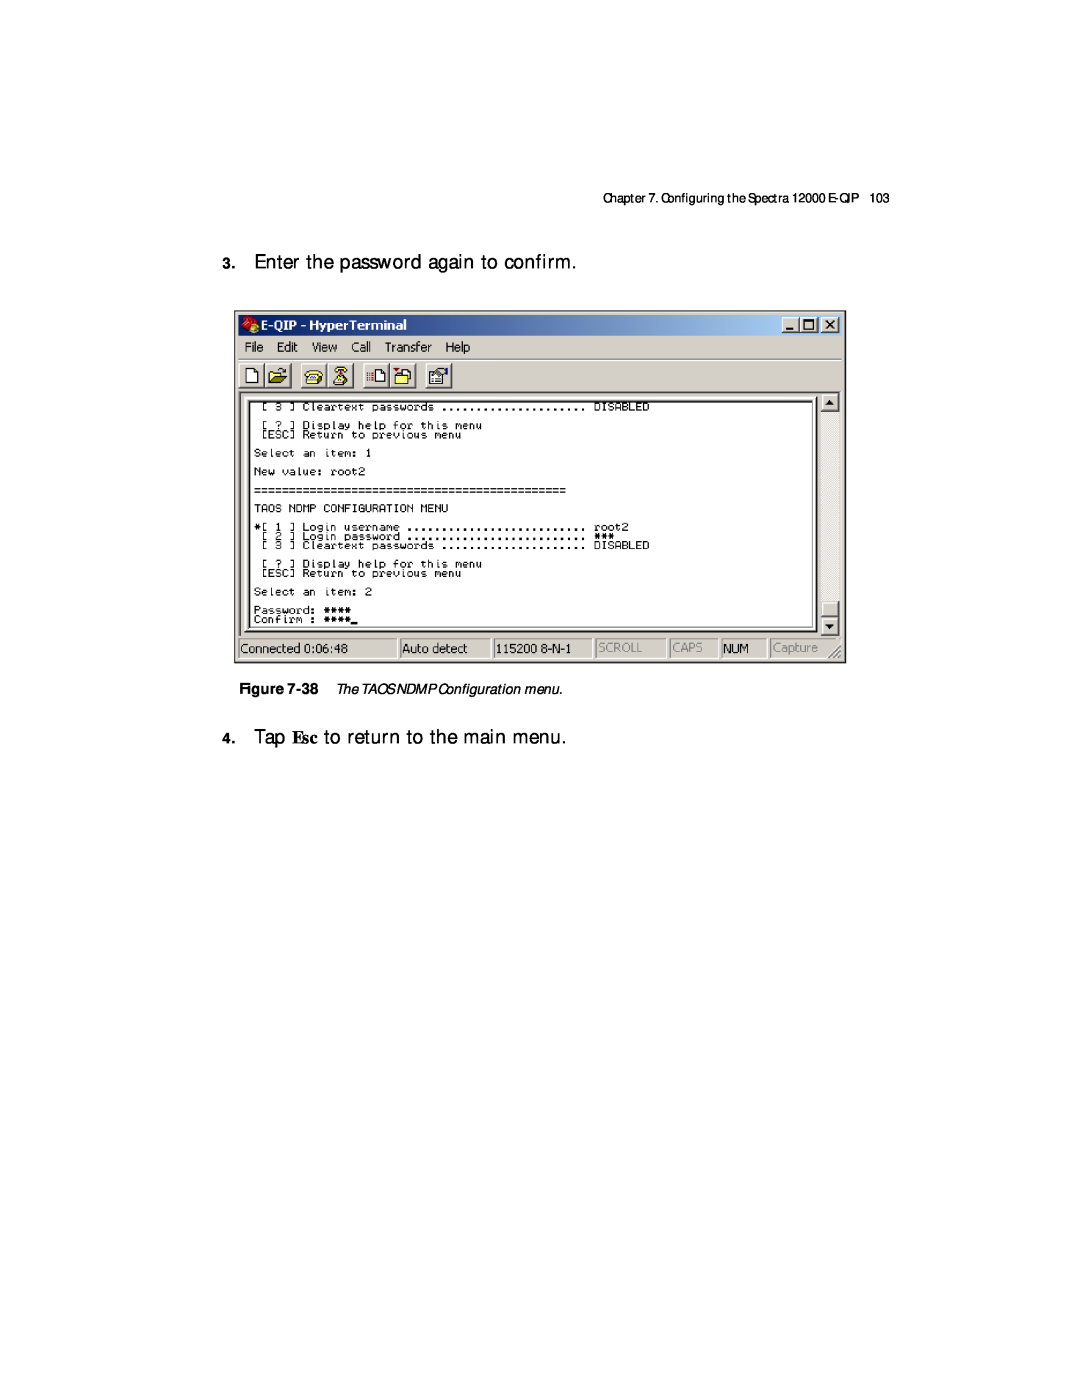 Spectra Logic Spectra 12000 manual 38 The TAOS NDMP Configuration menu, Enter the password again to confirm 